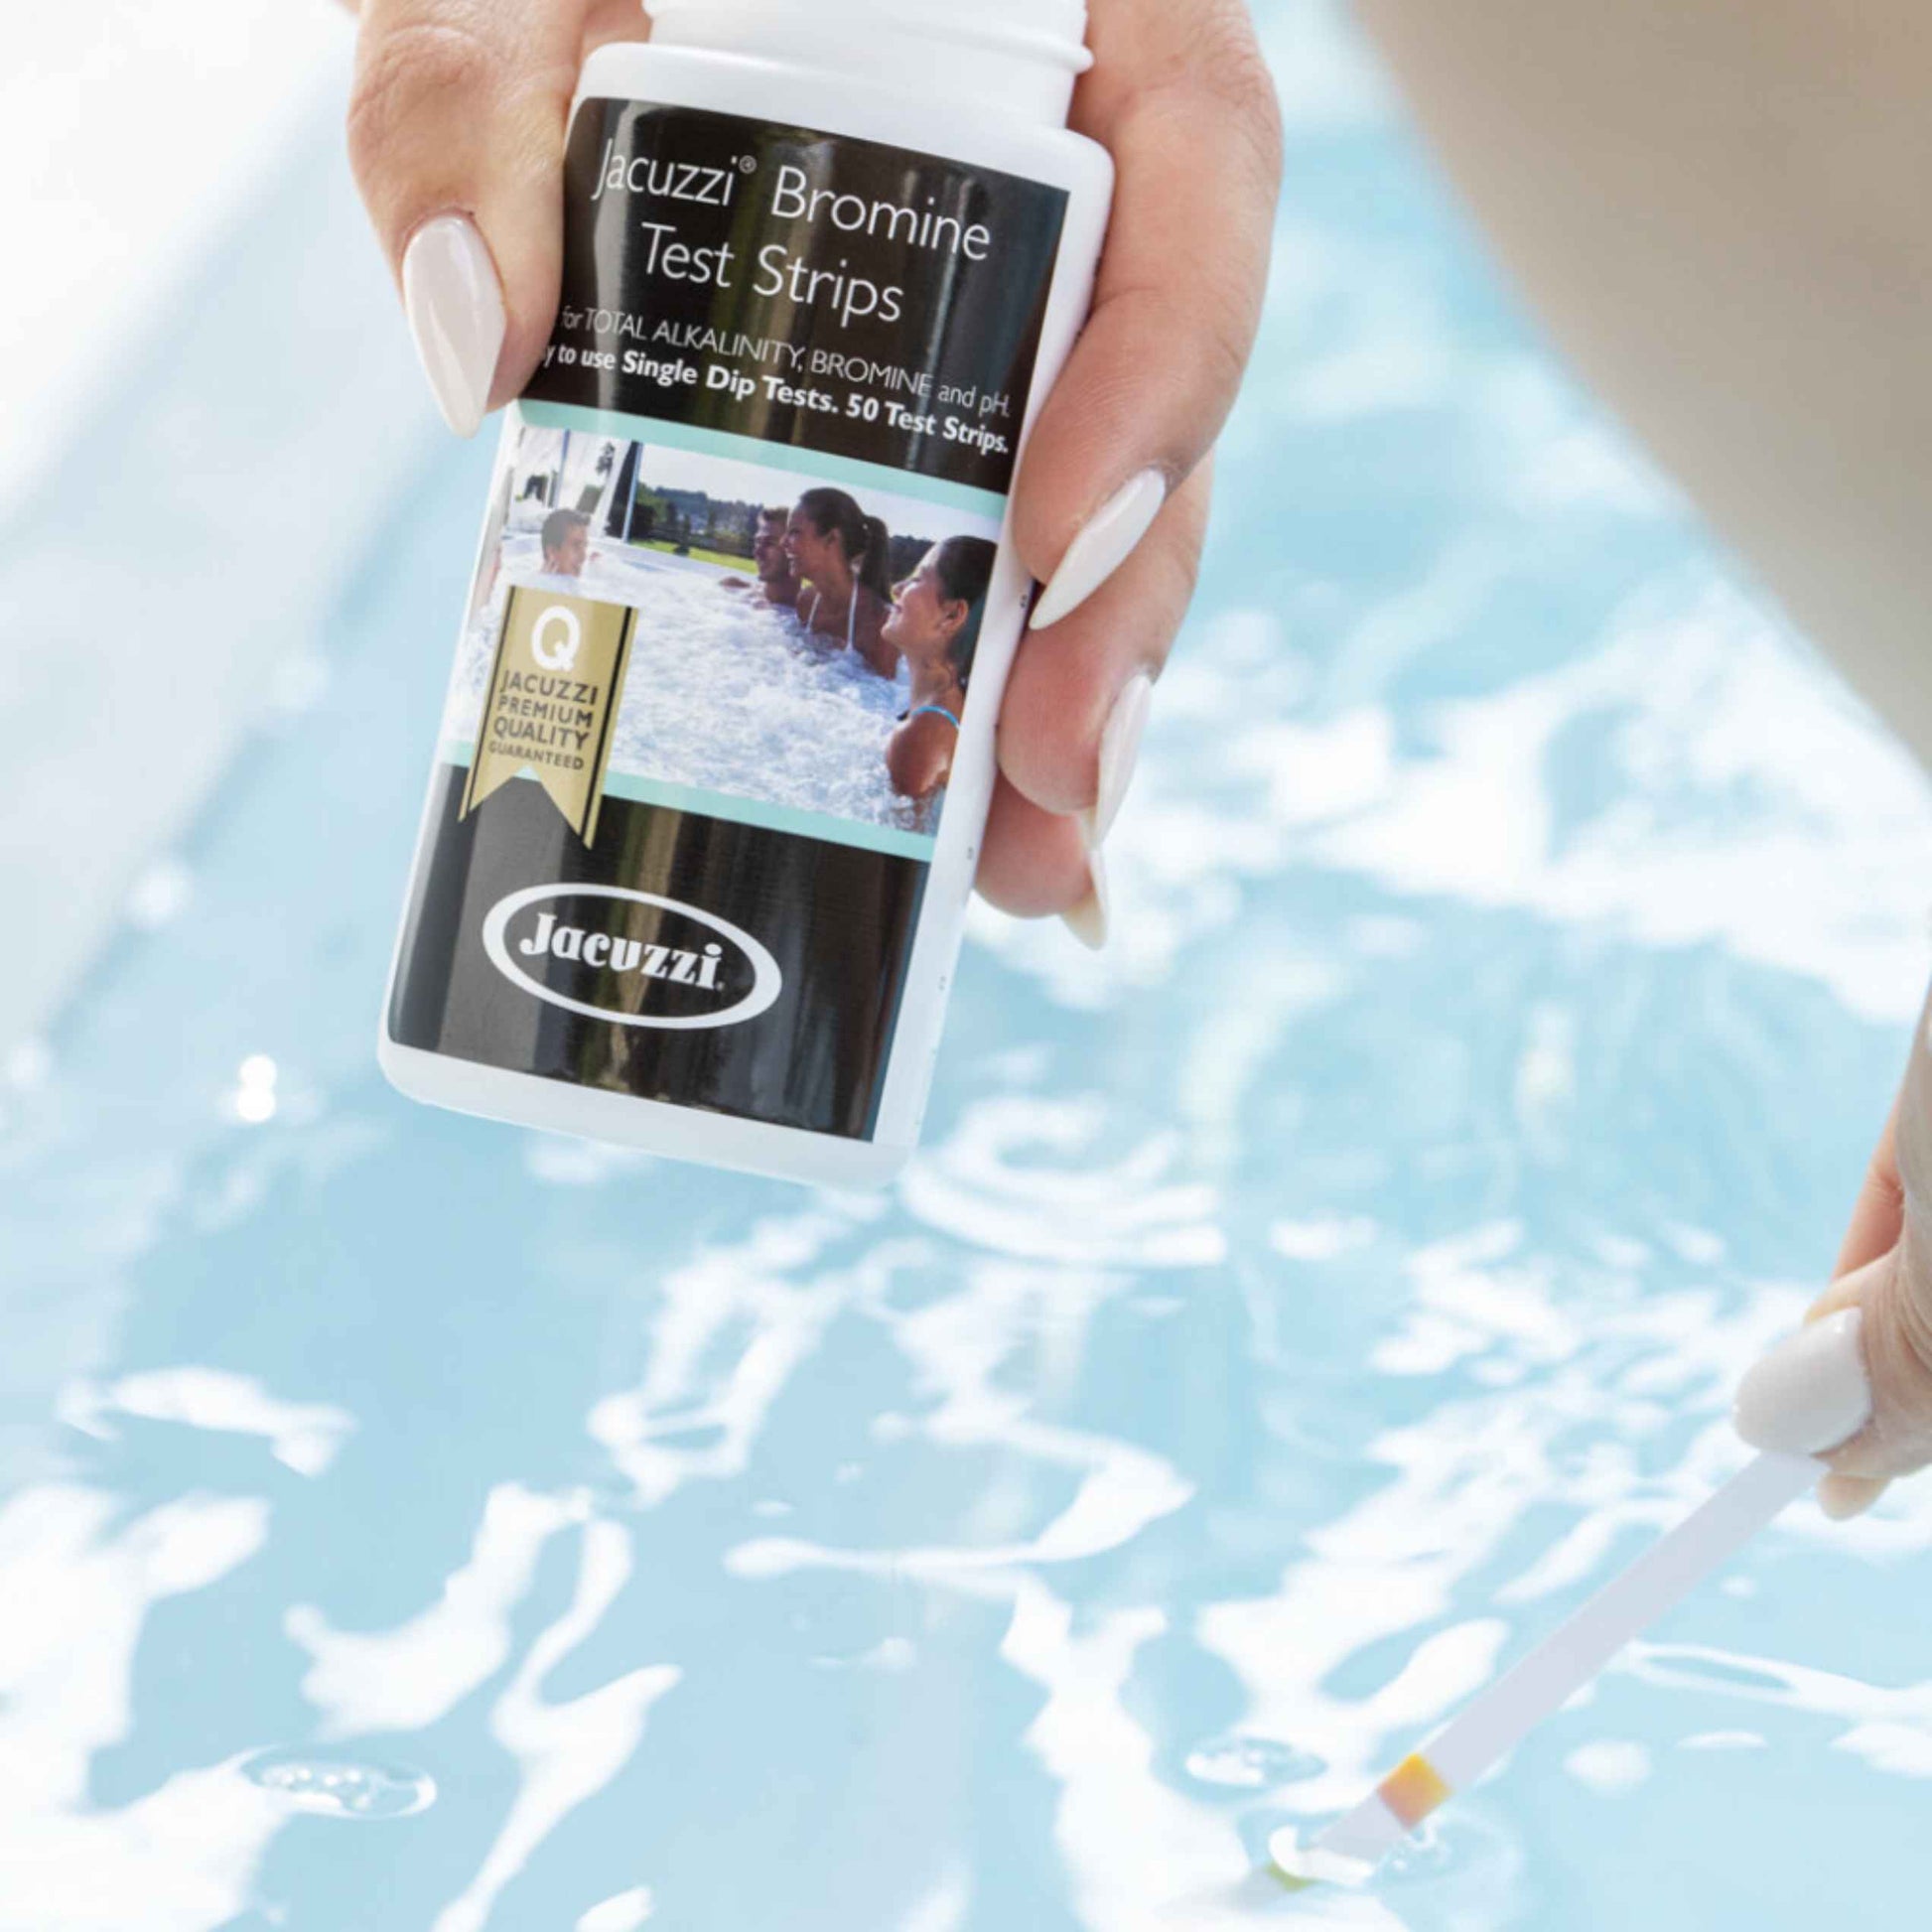 Bromine test strips to test the water in your hot tub or swim spa